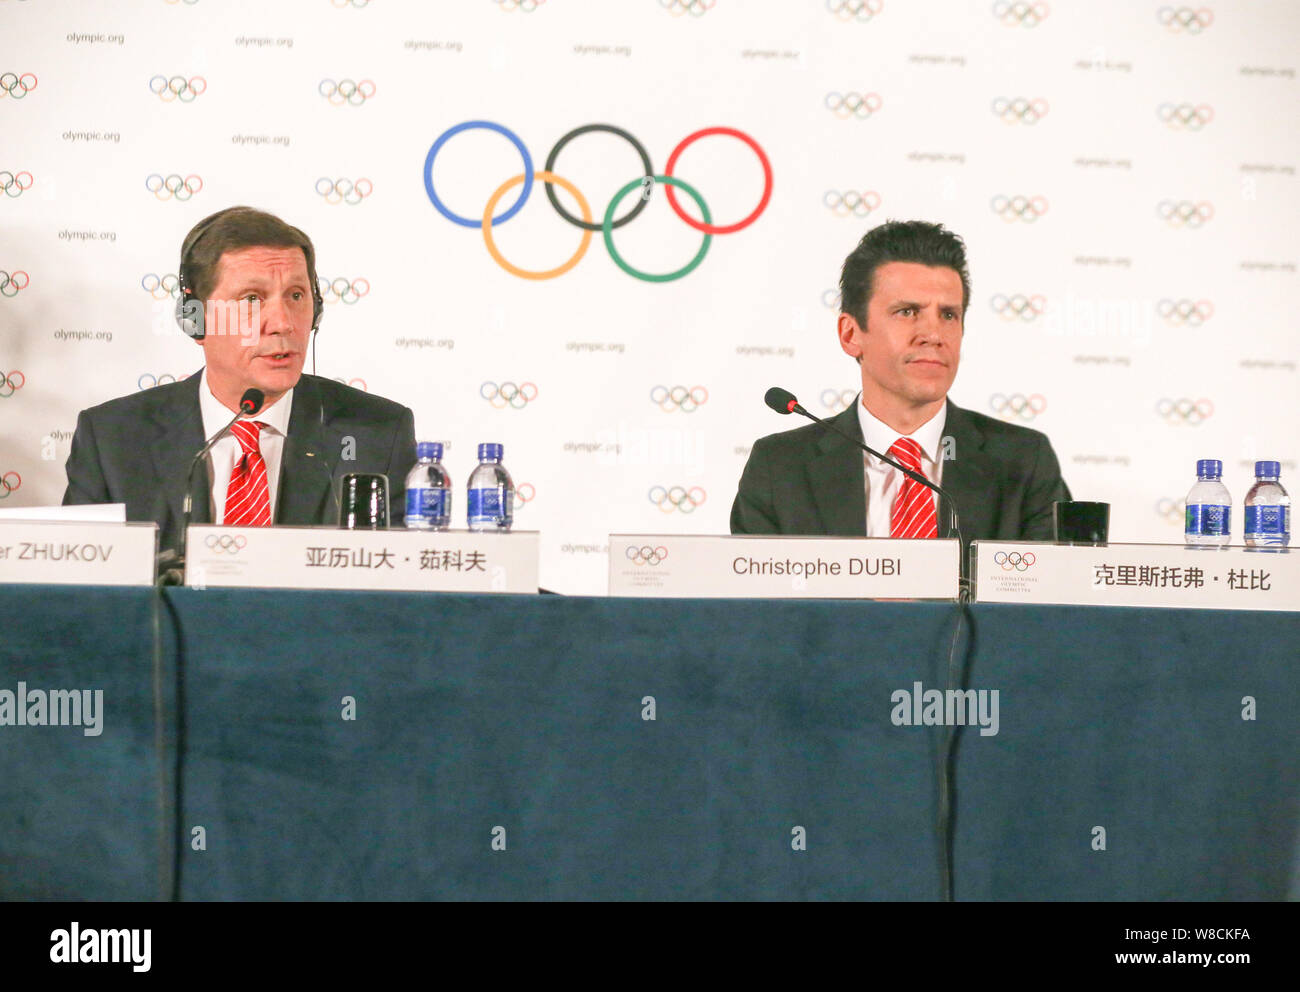 Alexander Zhukov, left, head of the 2022 Evaluation Commission for the International Olympic Committee (IOC), speaks next to Christophe Dubi, Sports D Stock Photo